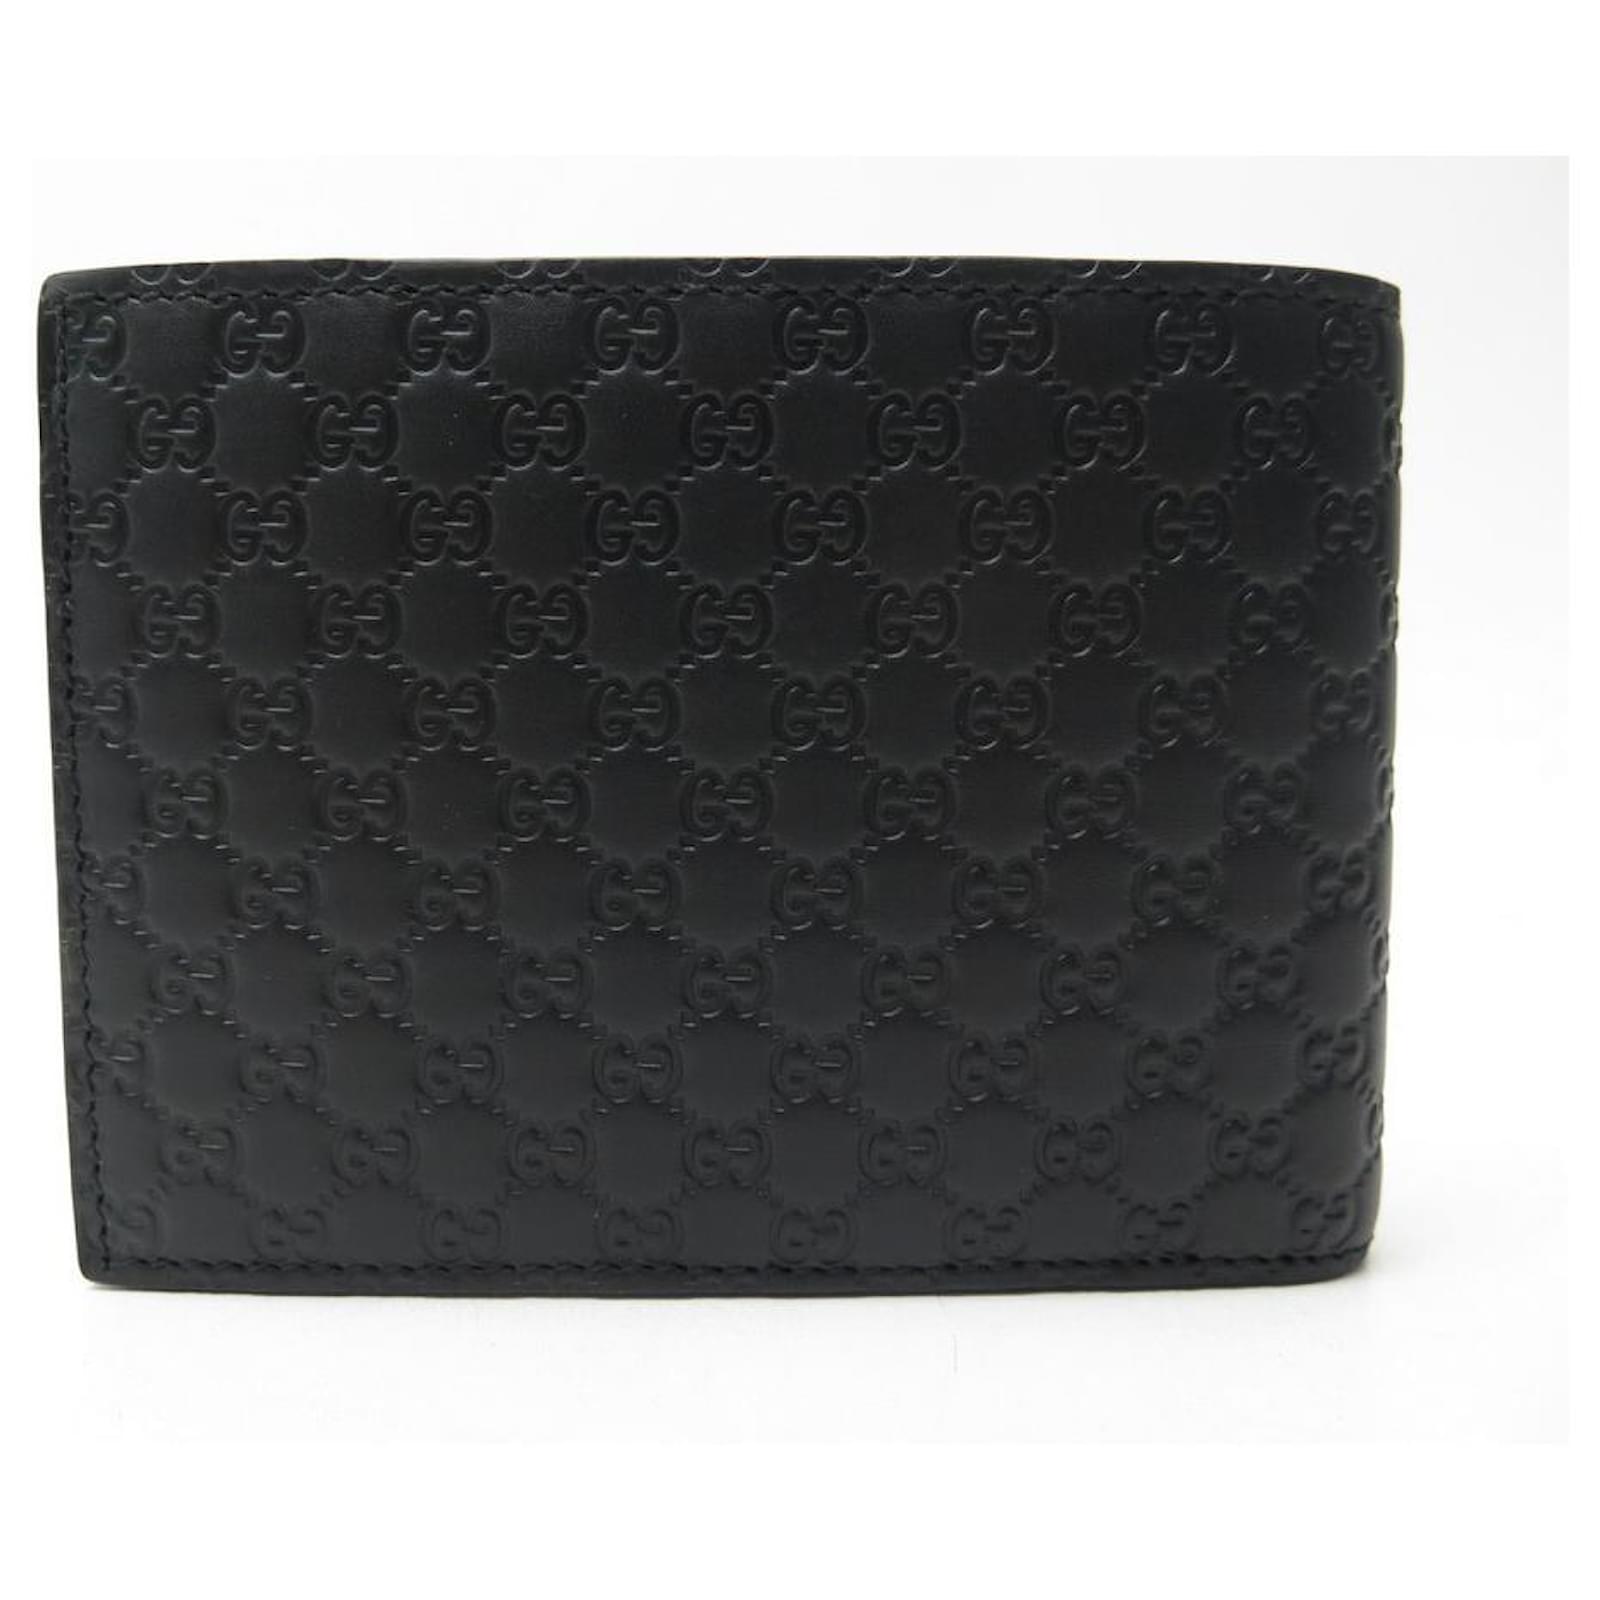 NEW GUCCI WALLET 278596 BLACK MONOGRAM MICROGUCCISSIMA LEATHER WALLET ...